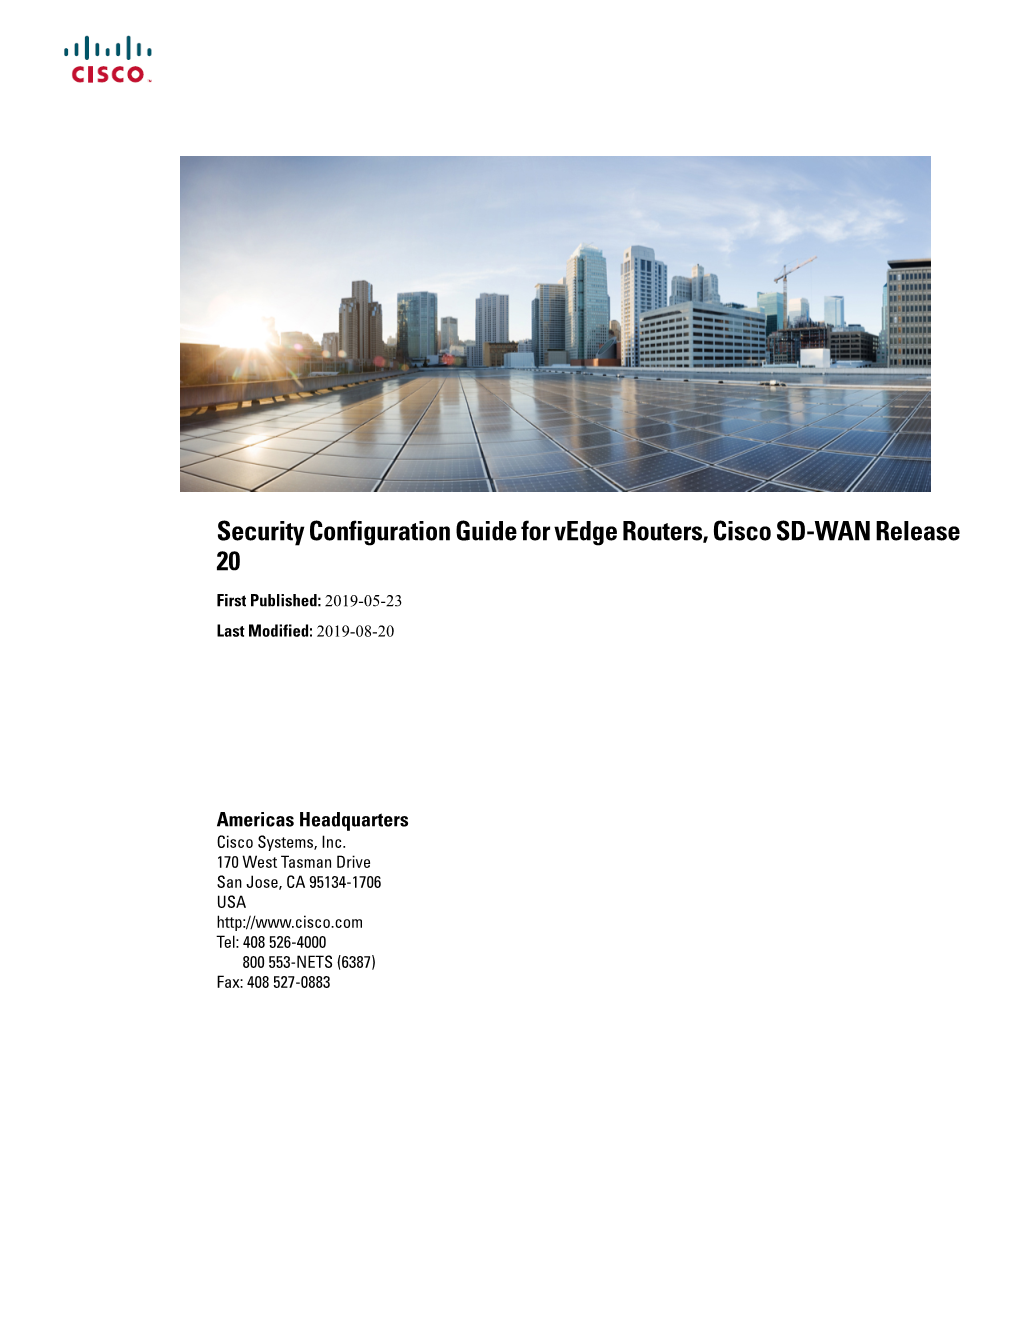 Security Configuration Guide for Vedge Routers, Cisco SD-WAN Release 20